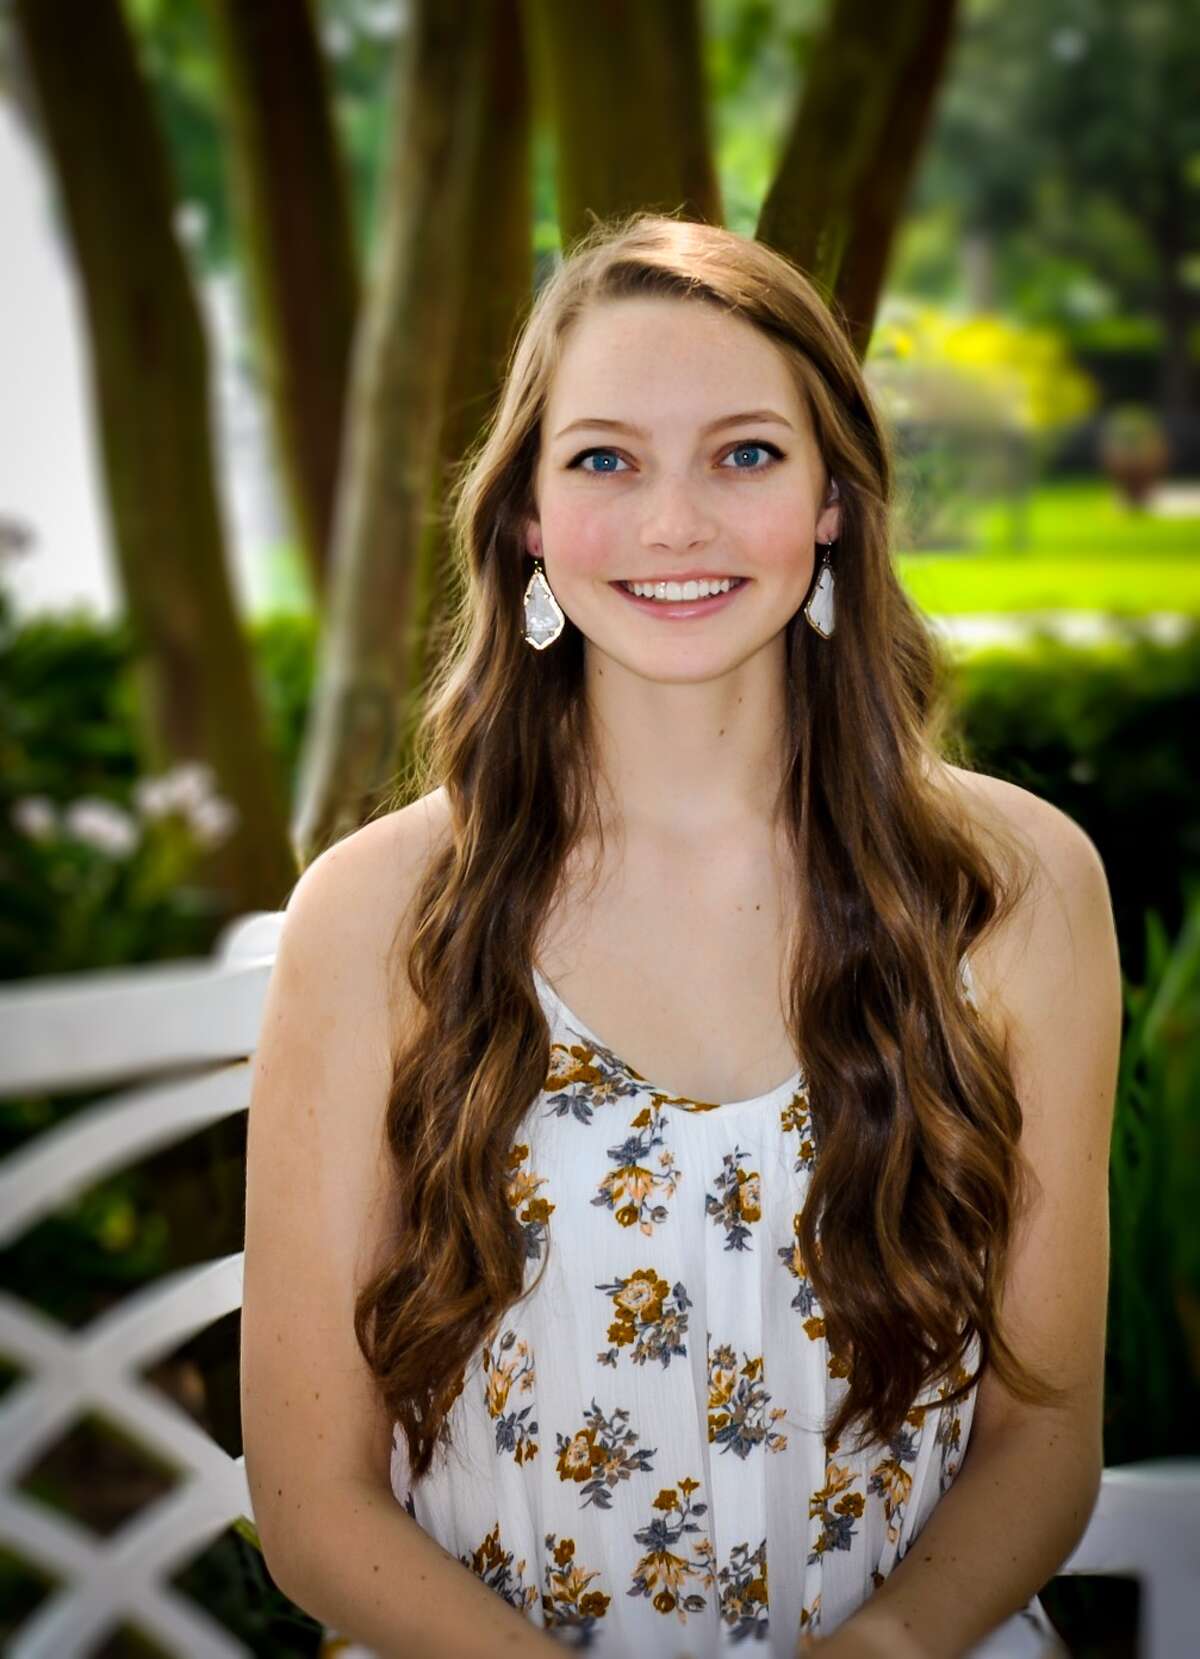 ConocoPhillips scholarship winner and Seven Lakes High School graduate Kaylee Buchanan plans to attend Texas A&M University.